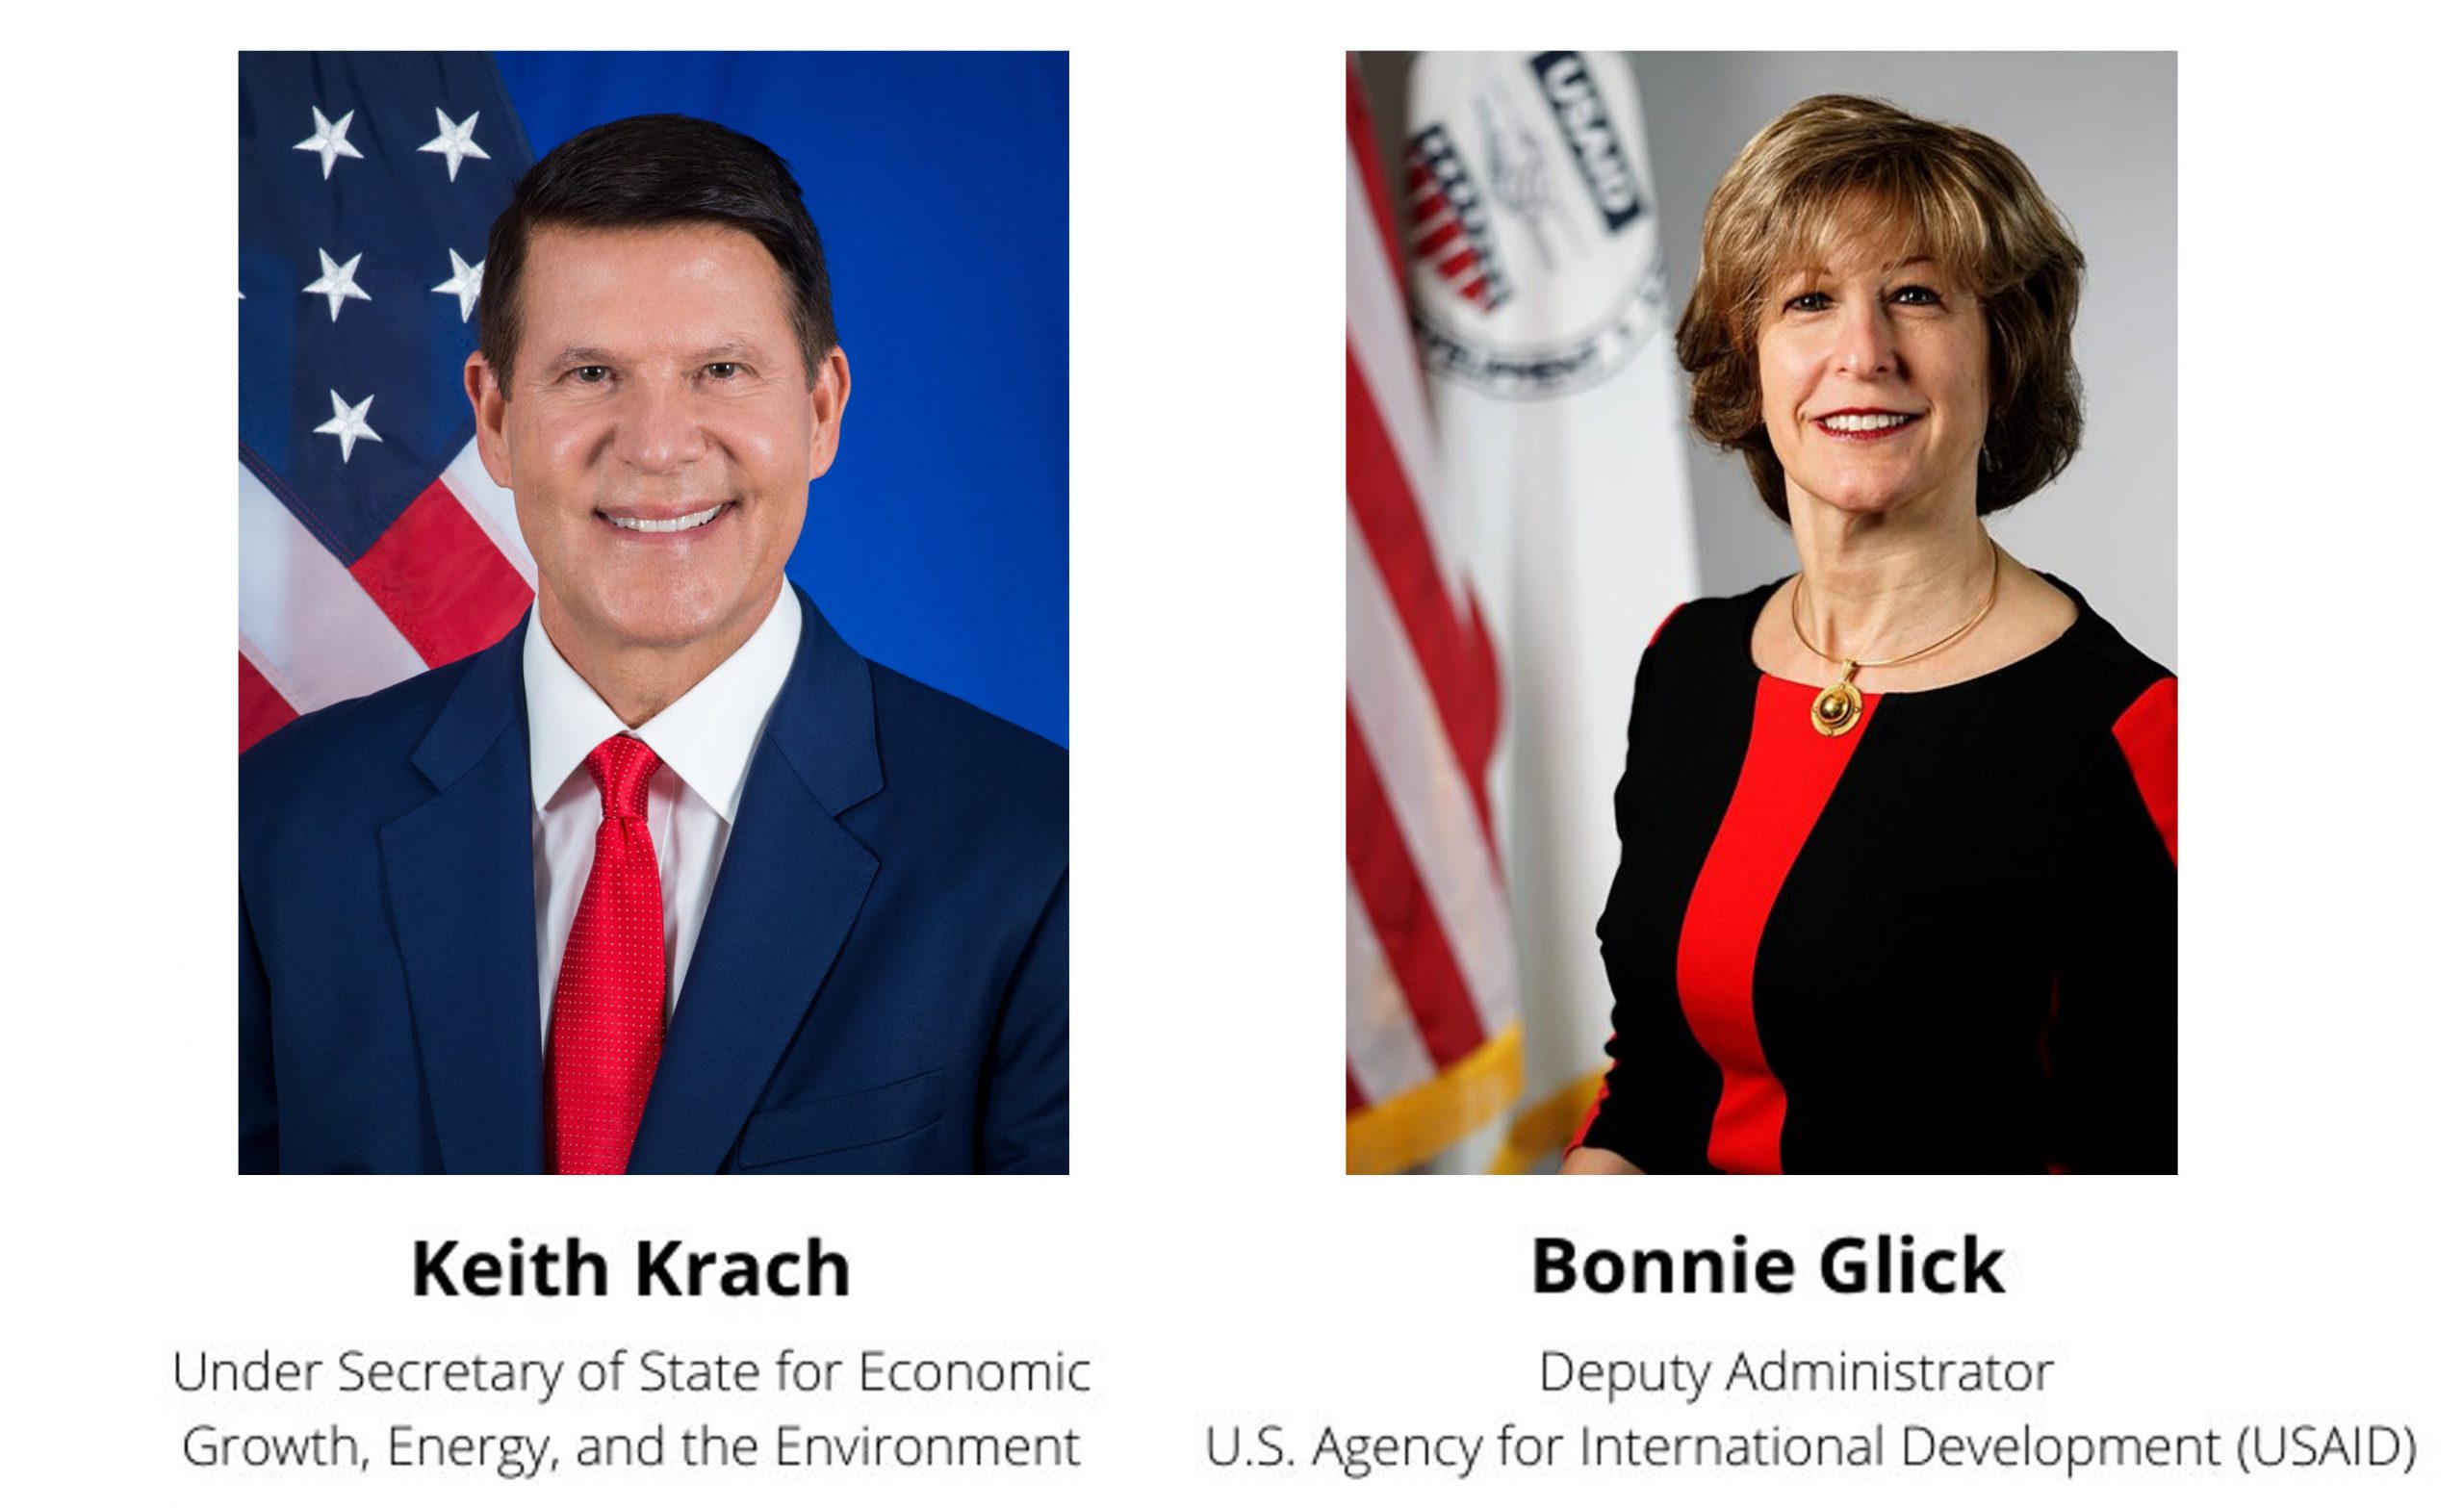 Teleconference with Keith Krach, Under Secretary of State (Economic Growth, Energy, and the Environment), and Bonnie Glick, Deputy Admin. of the U.S. Agency for International Development (USAID)